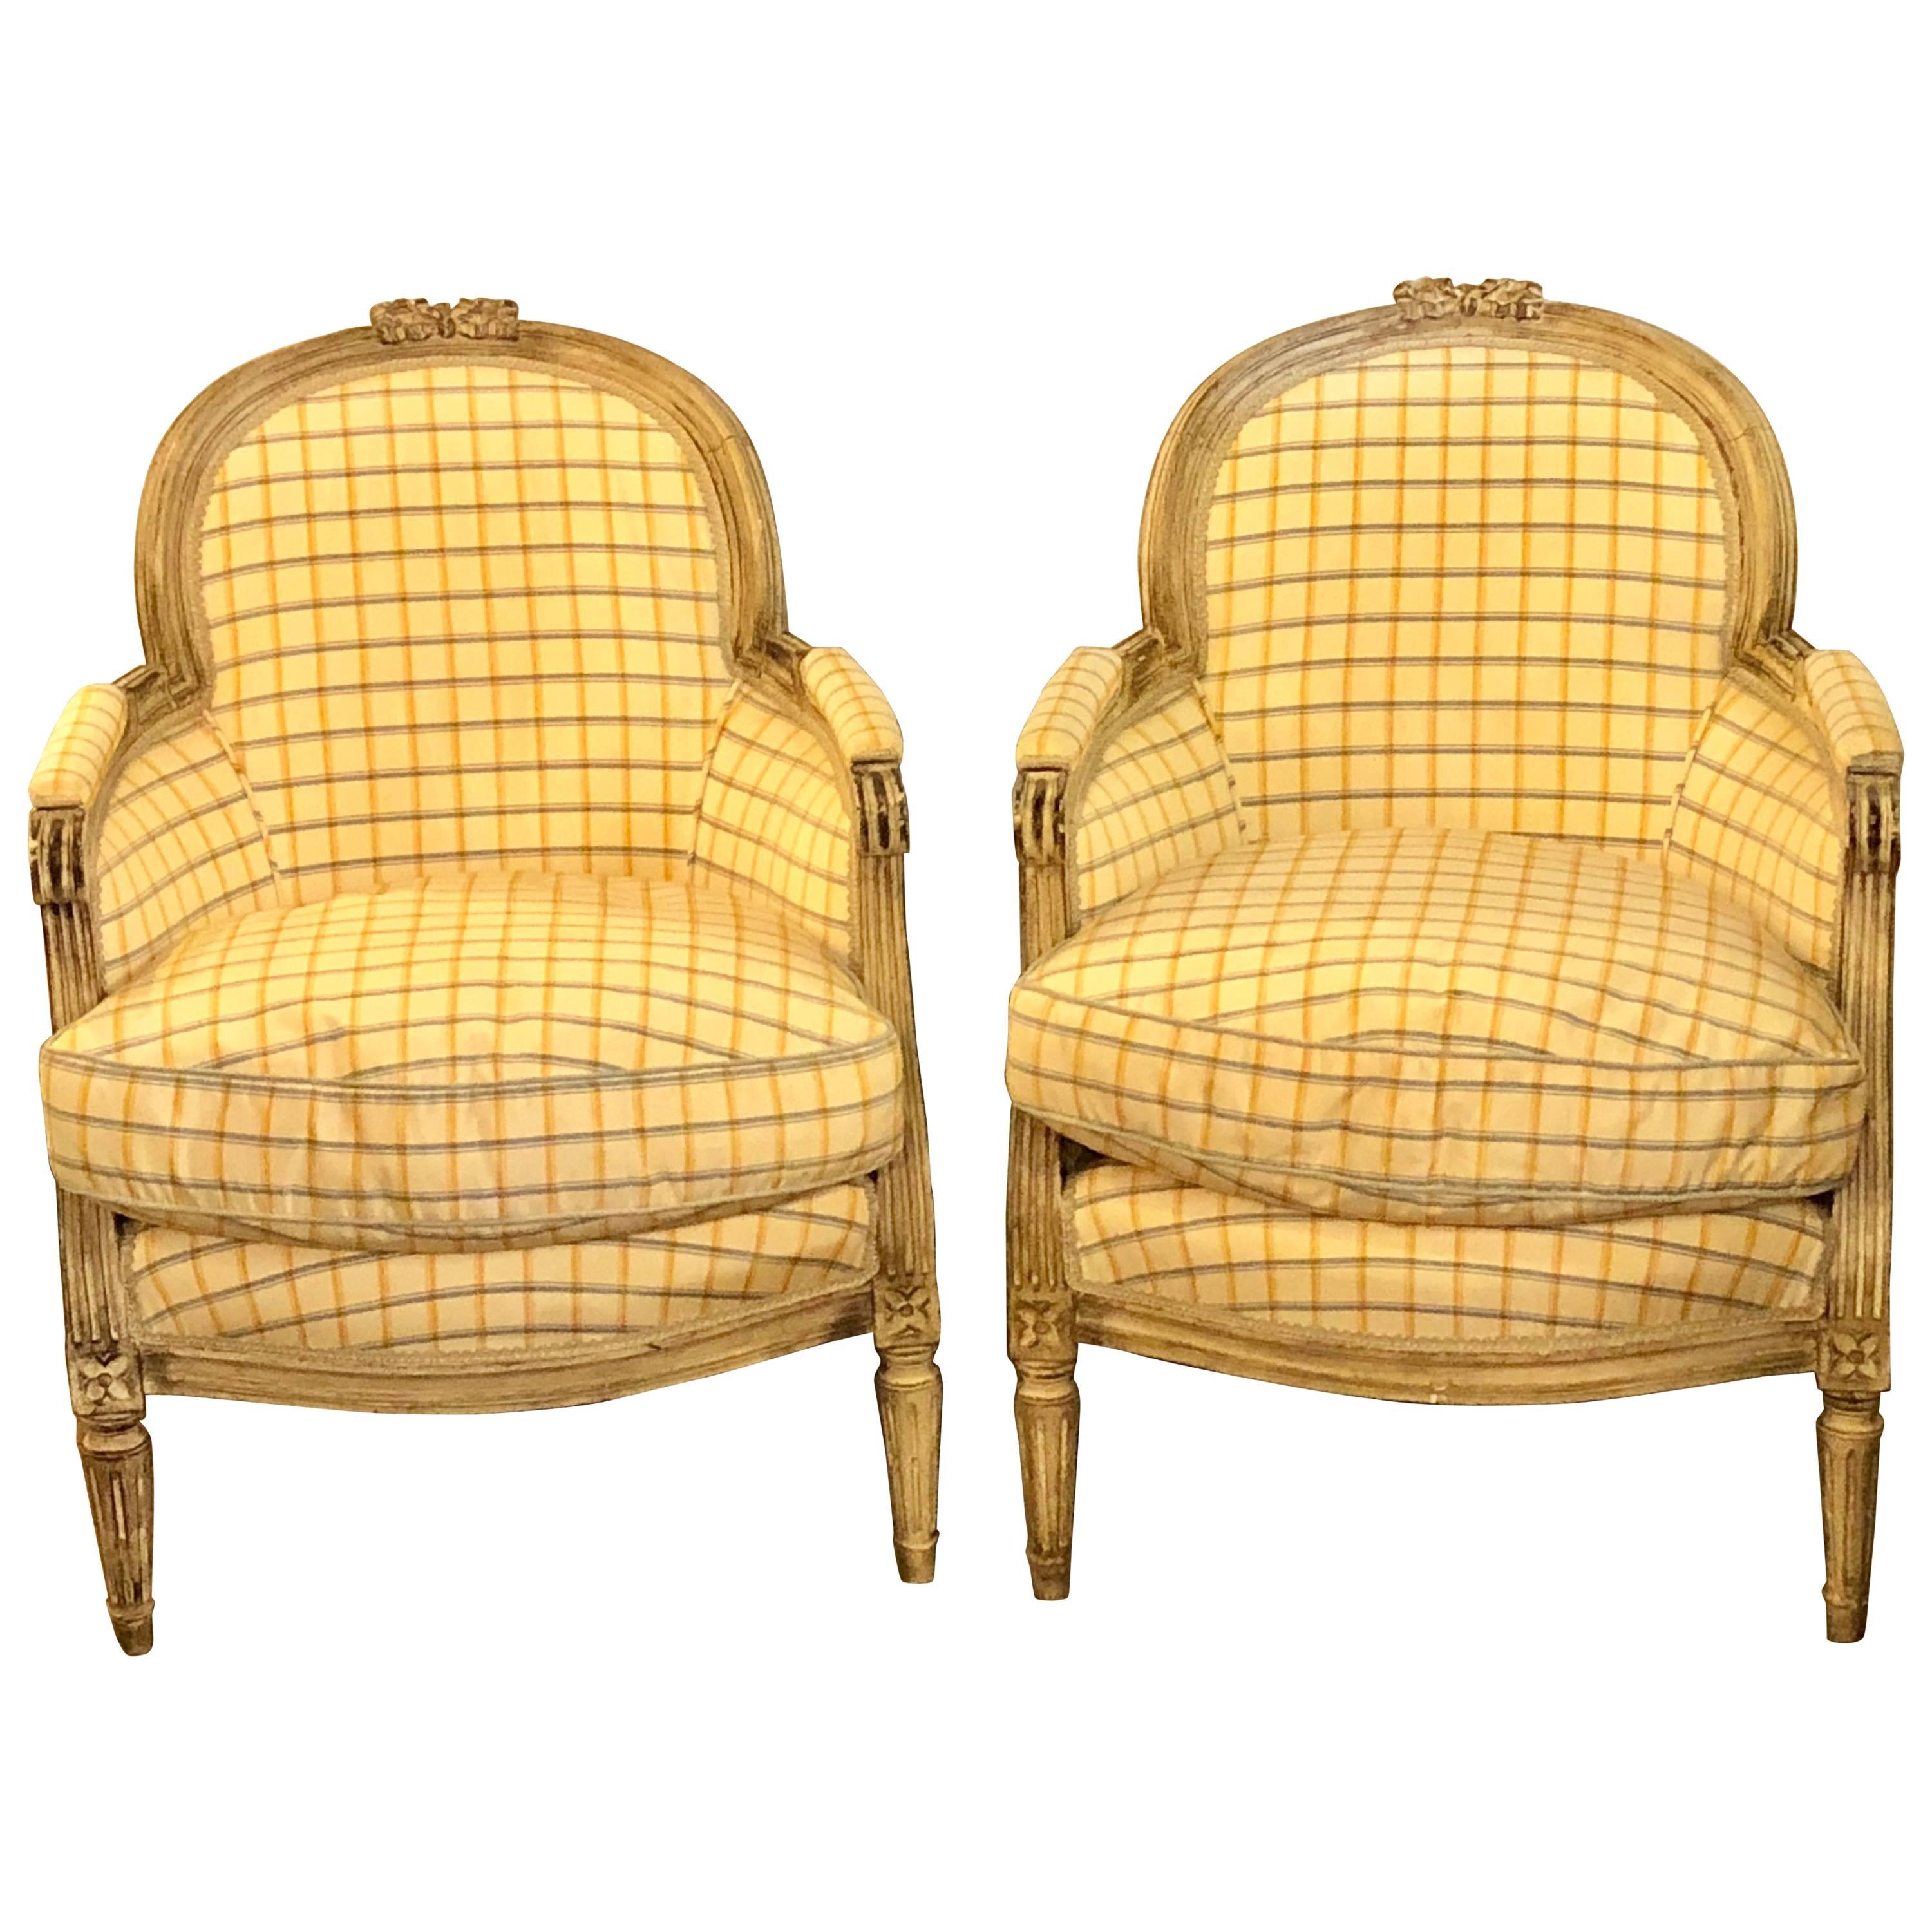 Pair of Maison Jansen Louis XVI Style Bergere Chairs in Burberry Fashion Fabric